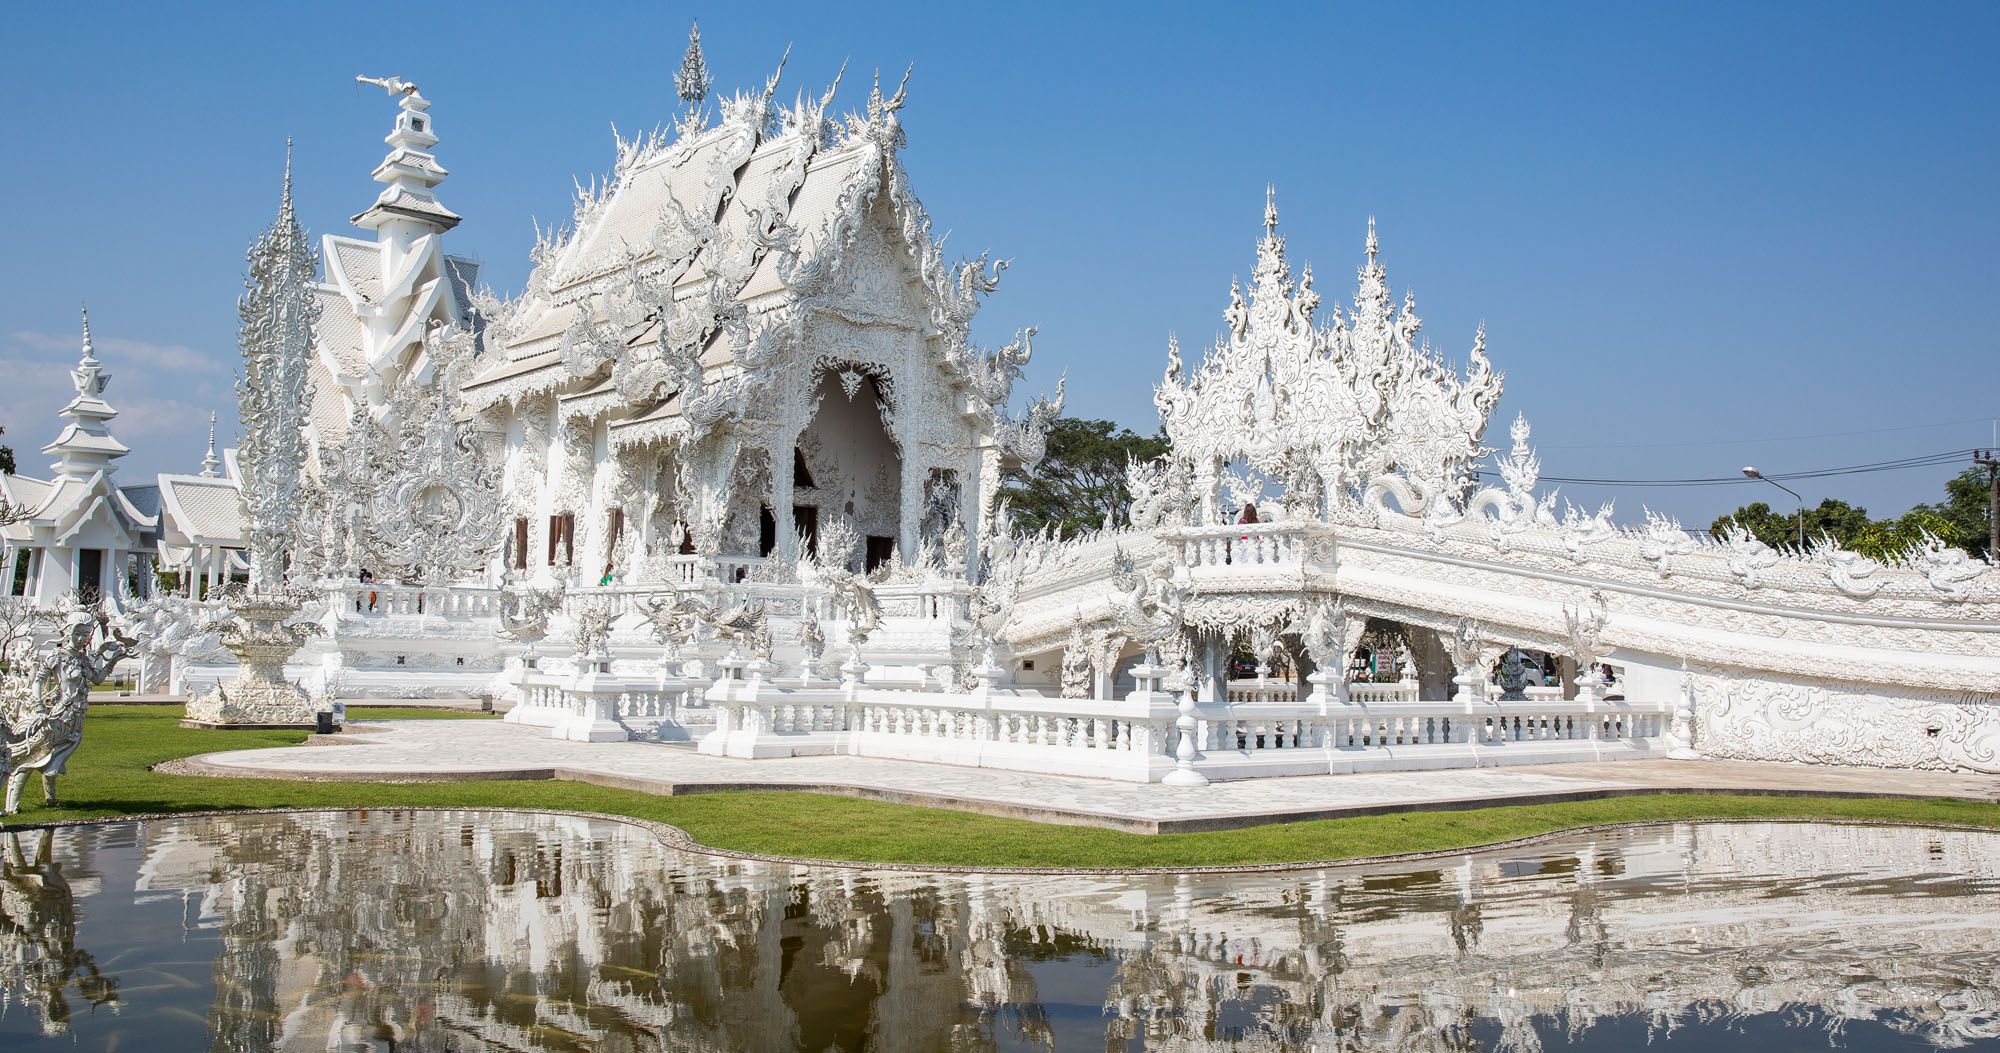 Featured image for “Cycling to the White Temple, Chiang Rai, Thailand”